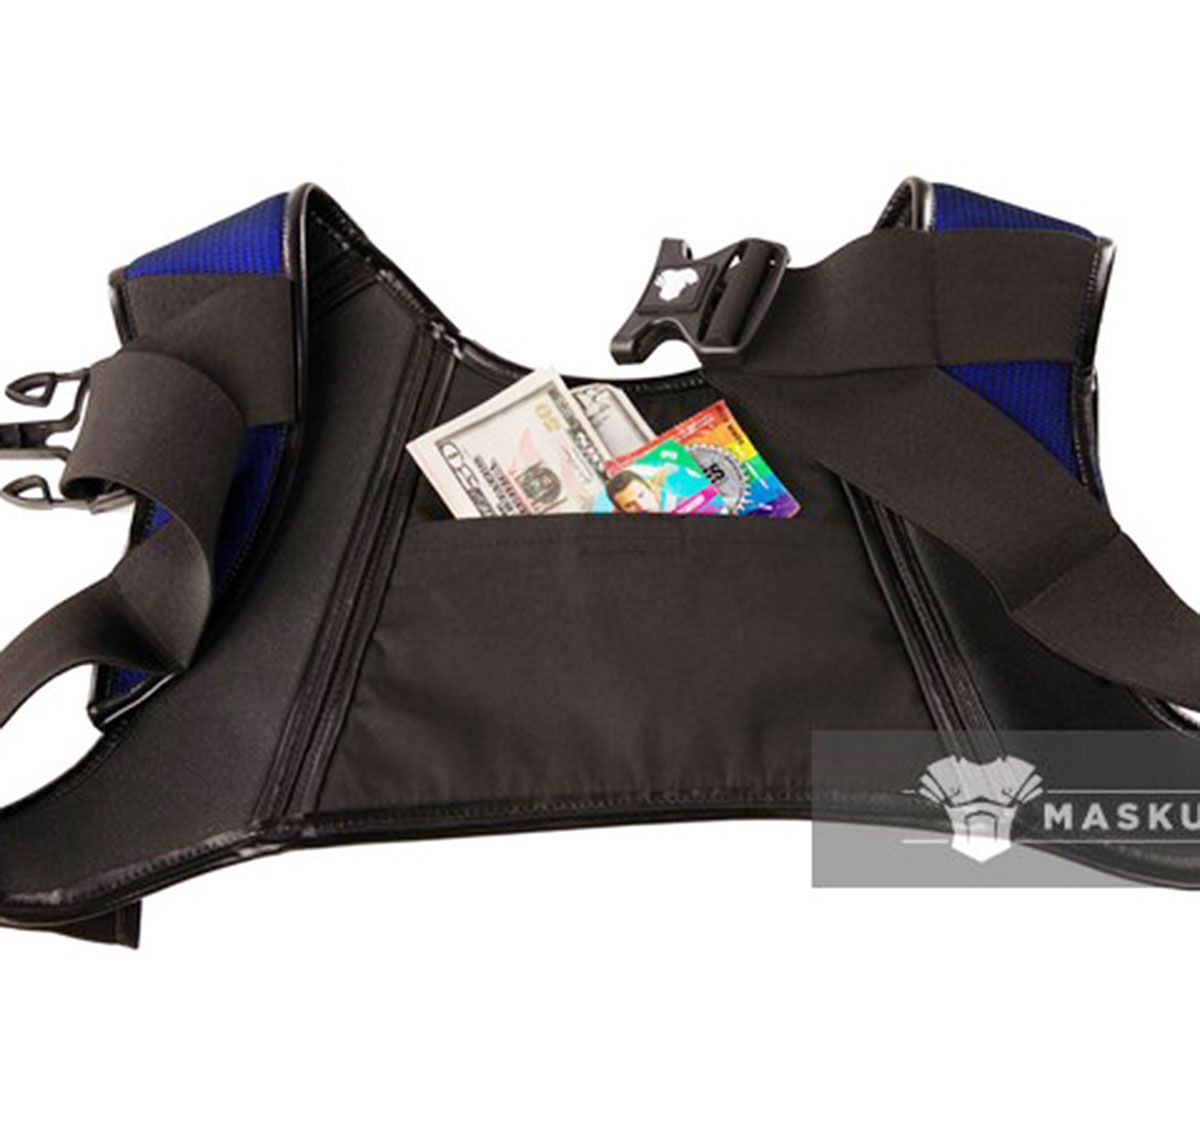 MASKULO Imbracatura ARMORED. COLOR-UNDER. HOLSTER CHEST HARNESS. AC064, nero/blu